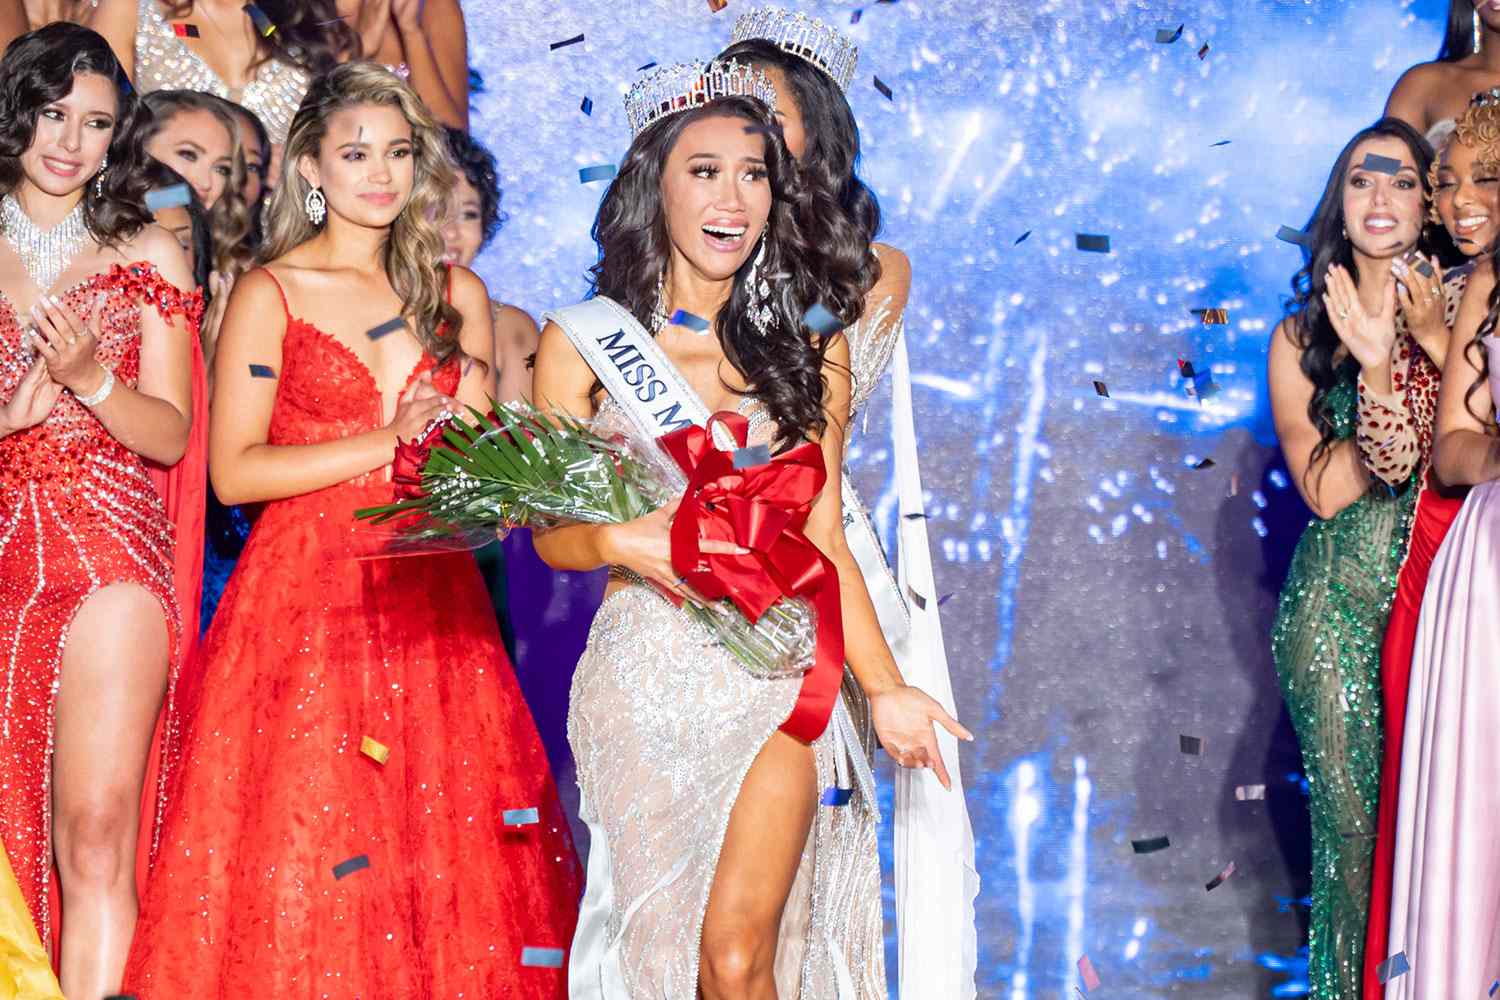 Bailey Anne Kennedy on 'Tremendous Honor' of Being First Trans Woman to Win Miss Maryland USA (Exclusive)